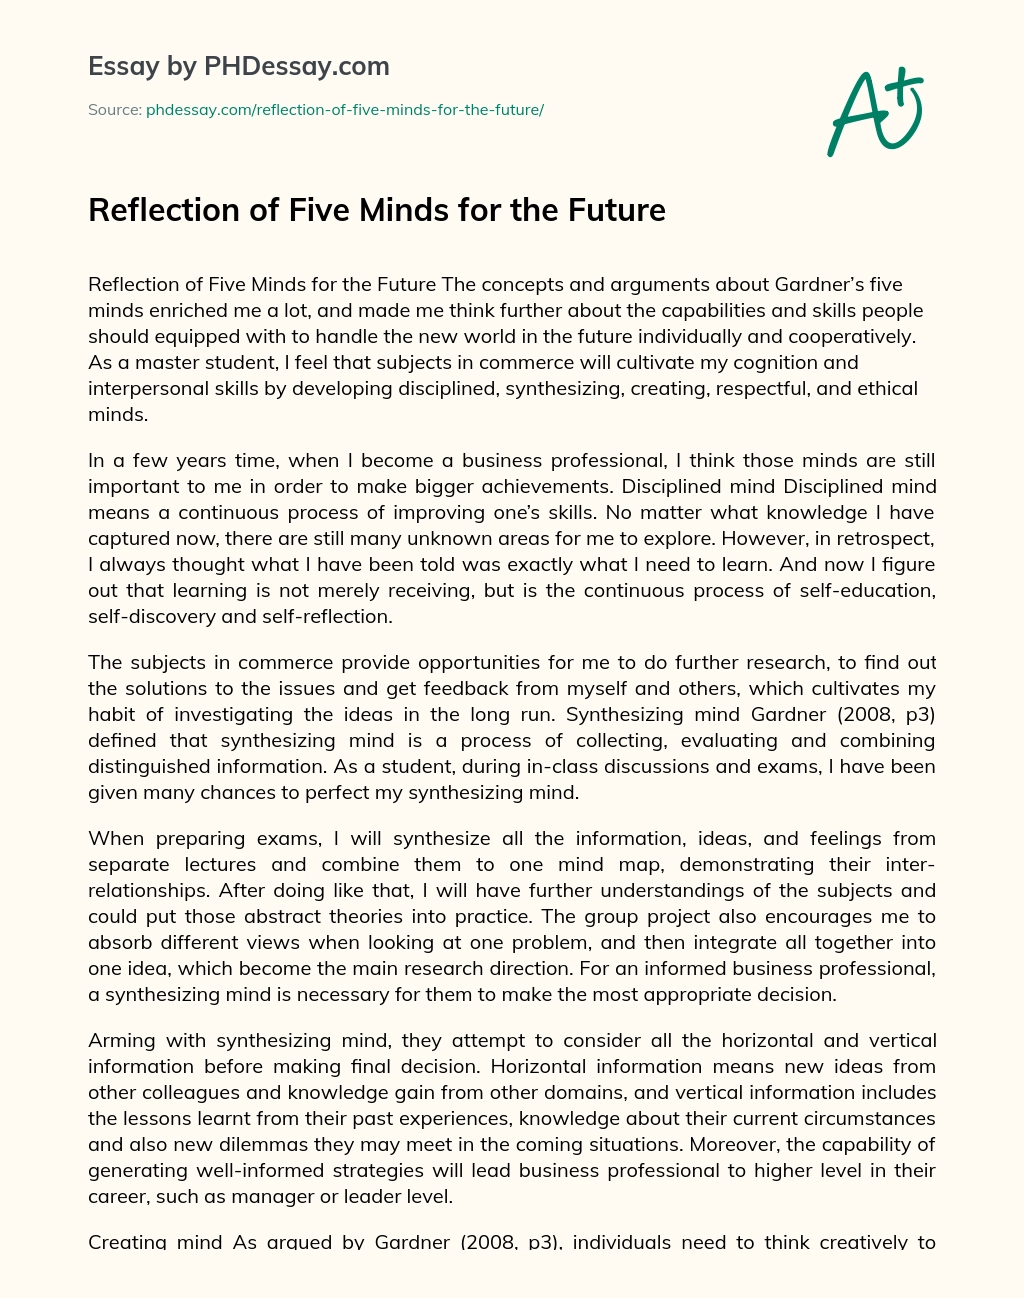 Reflection of Five Minds for the Future essay